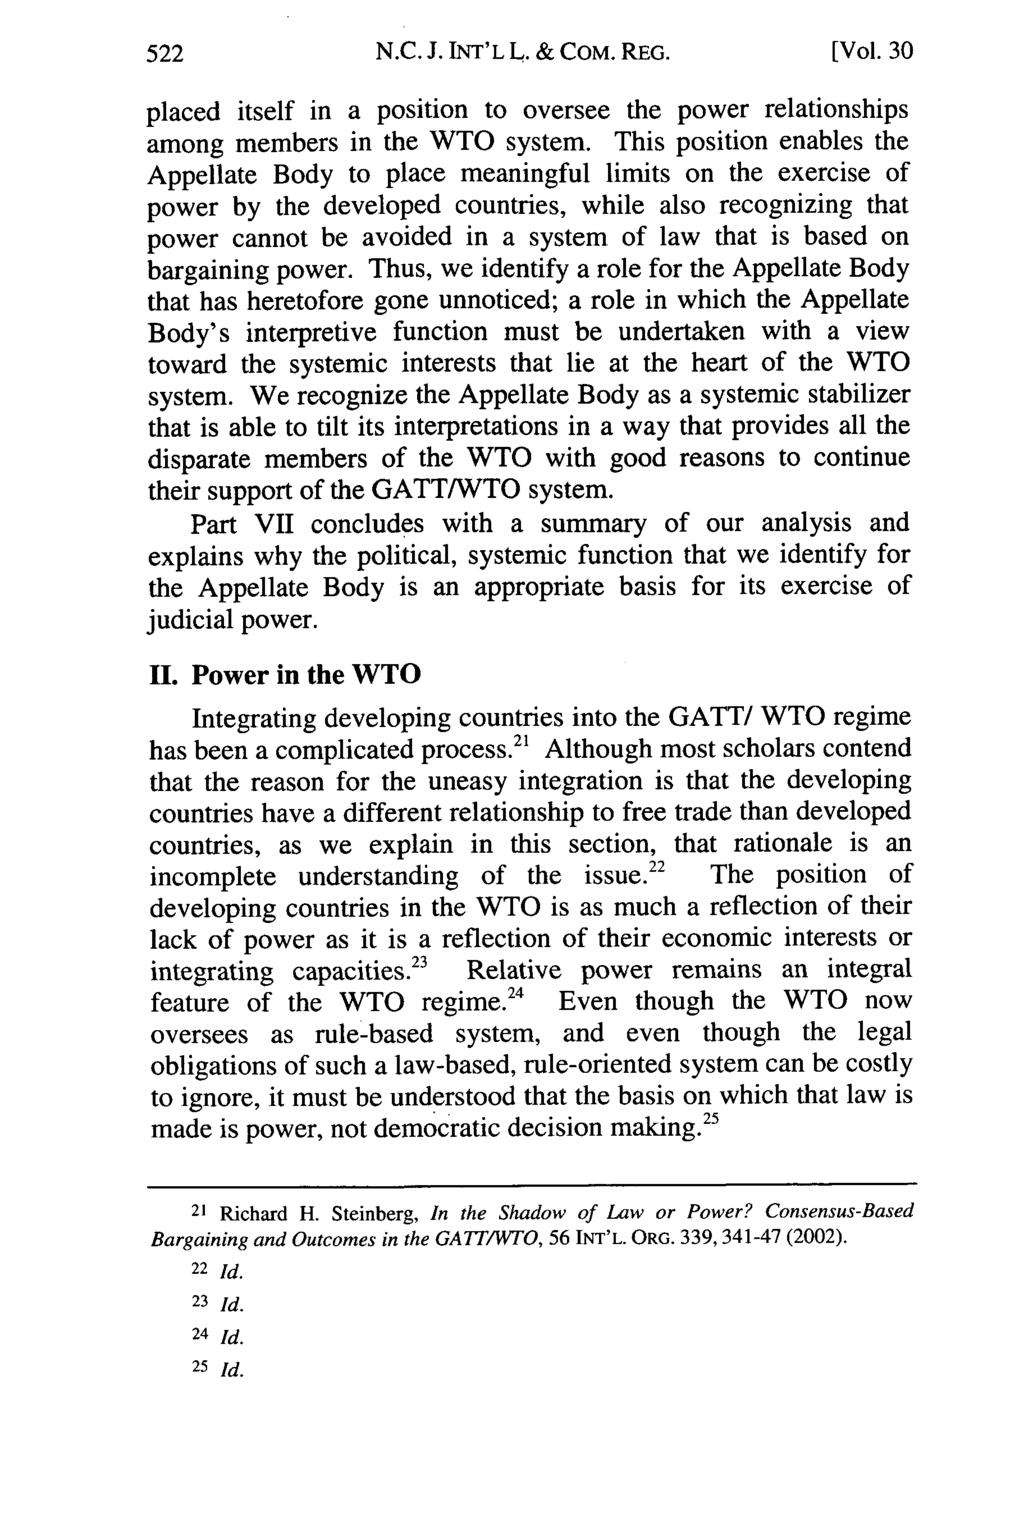 N.C. J. INT'L L. & COM. REG. [Vol. 30 placed itself in a position to oversee the power relationships among members in the WTO system.